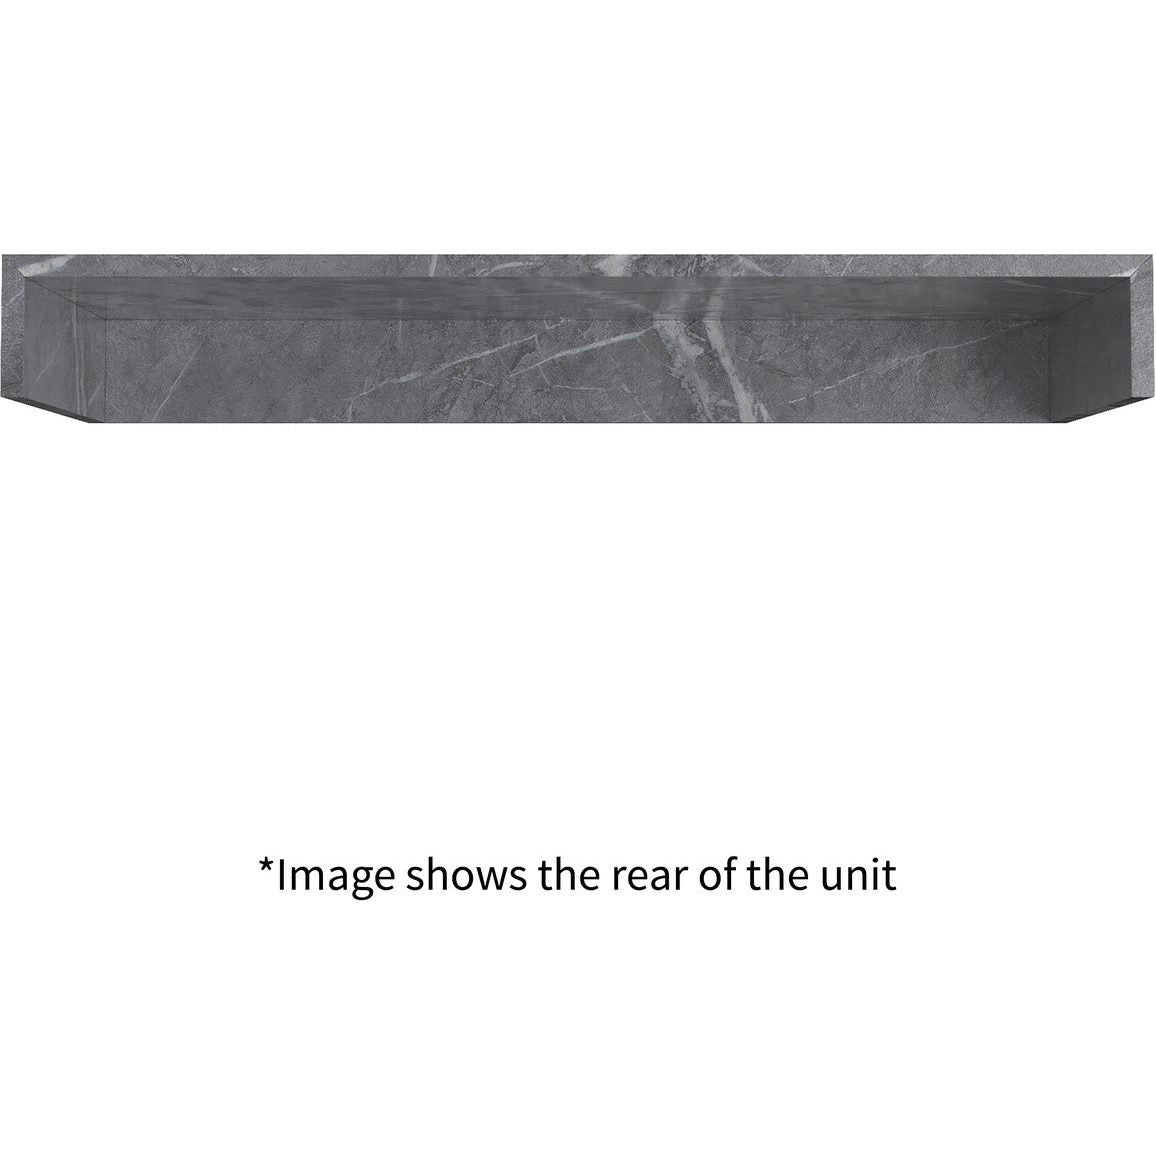 Hayes 800mm Wall Hung Grey Marble Basin Shelf & Brushed Brass Bottle Trap